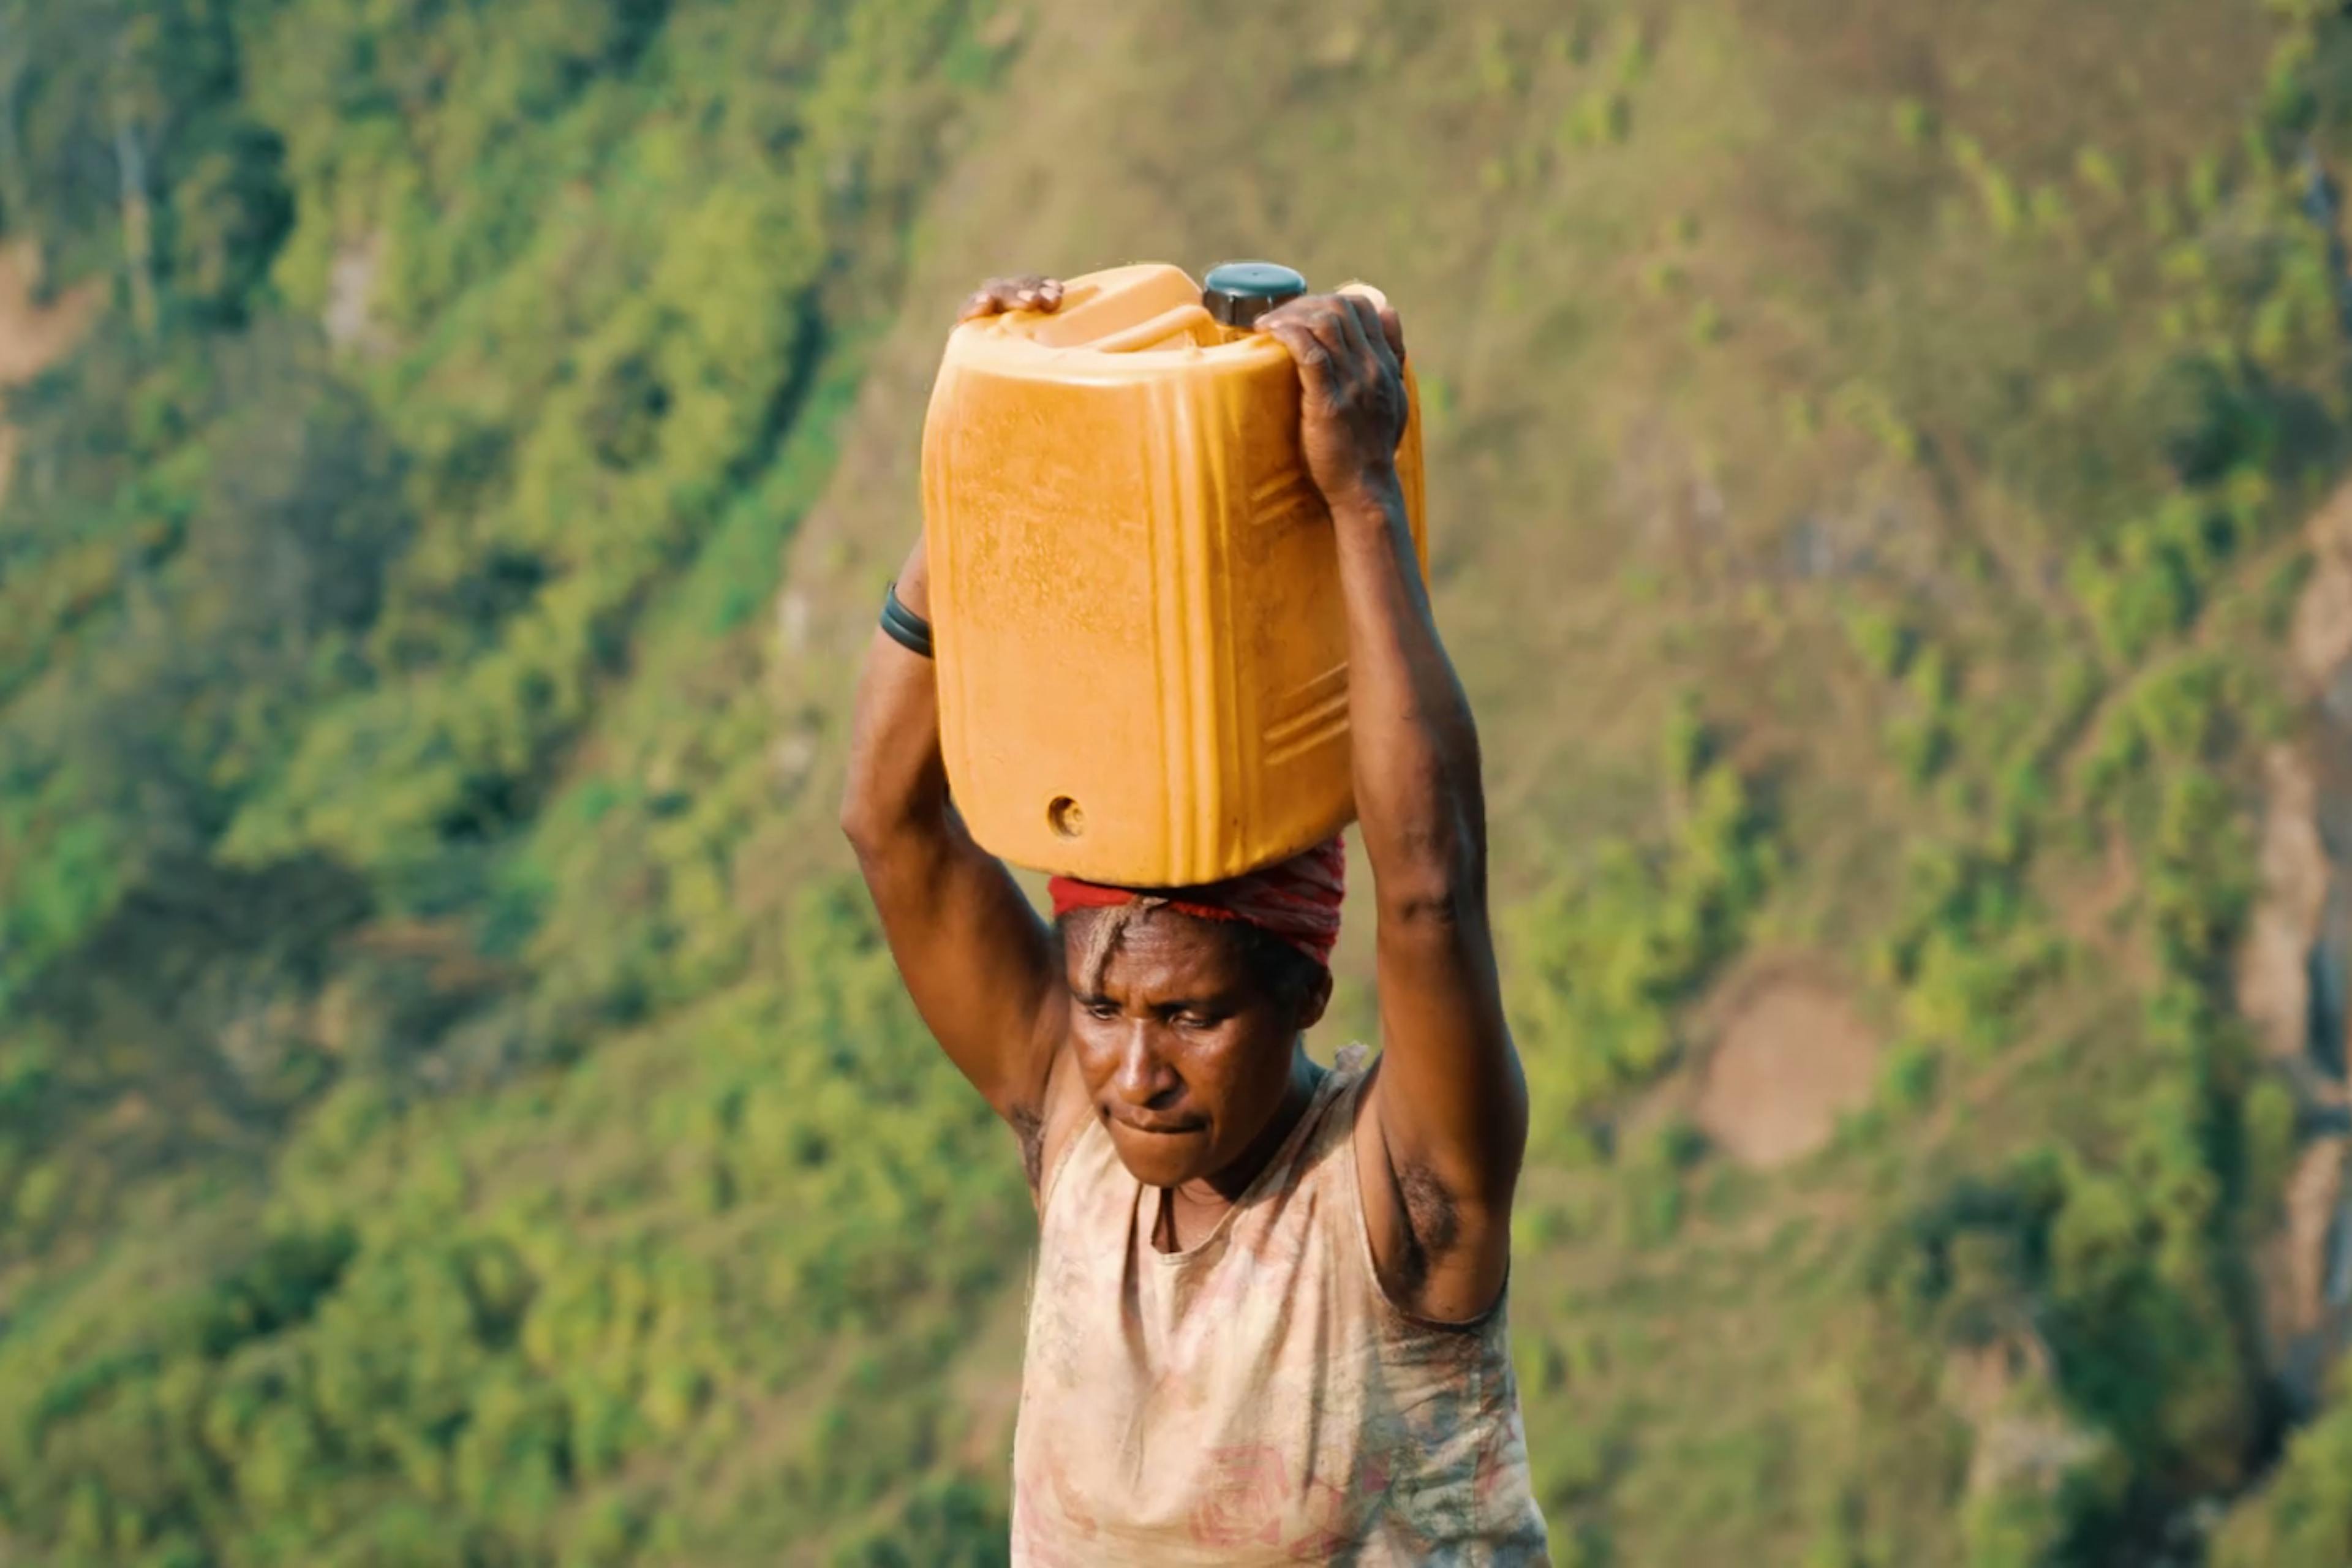 Carrying jerrycan filled with water. 